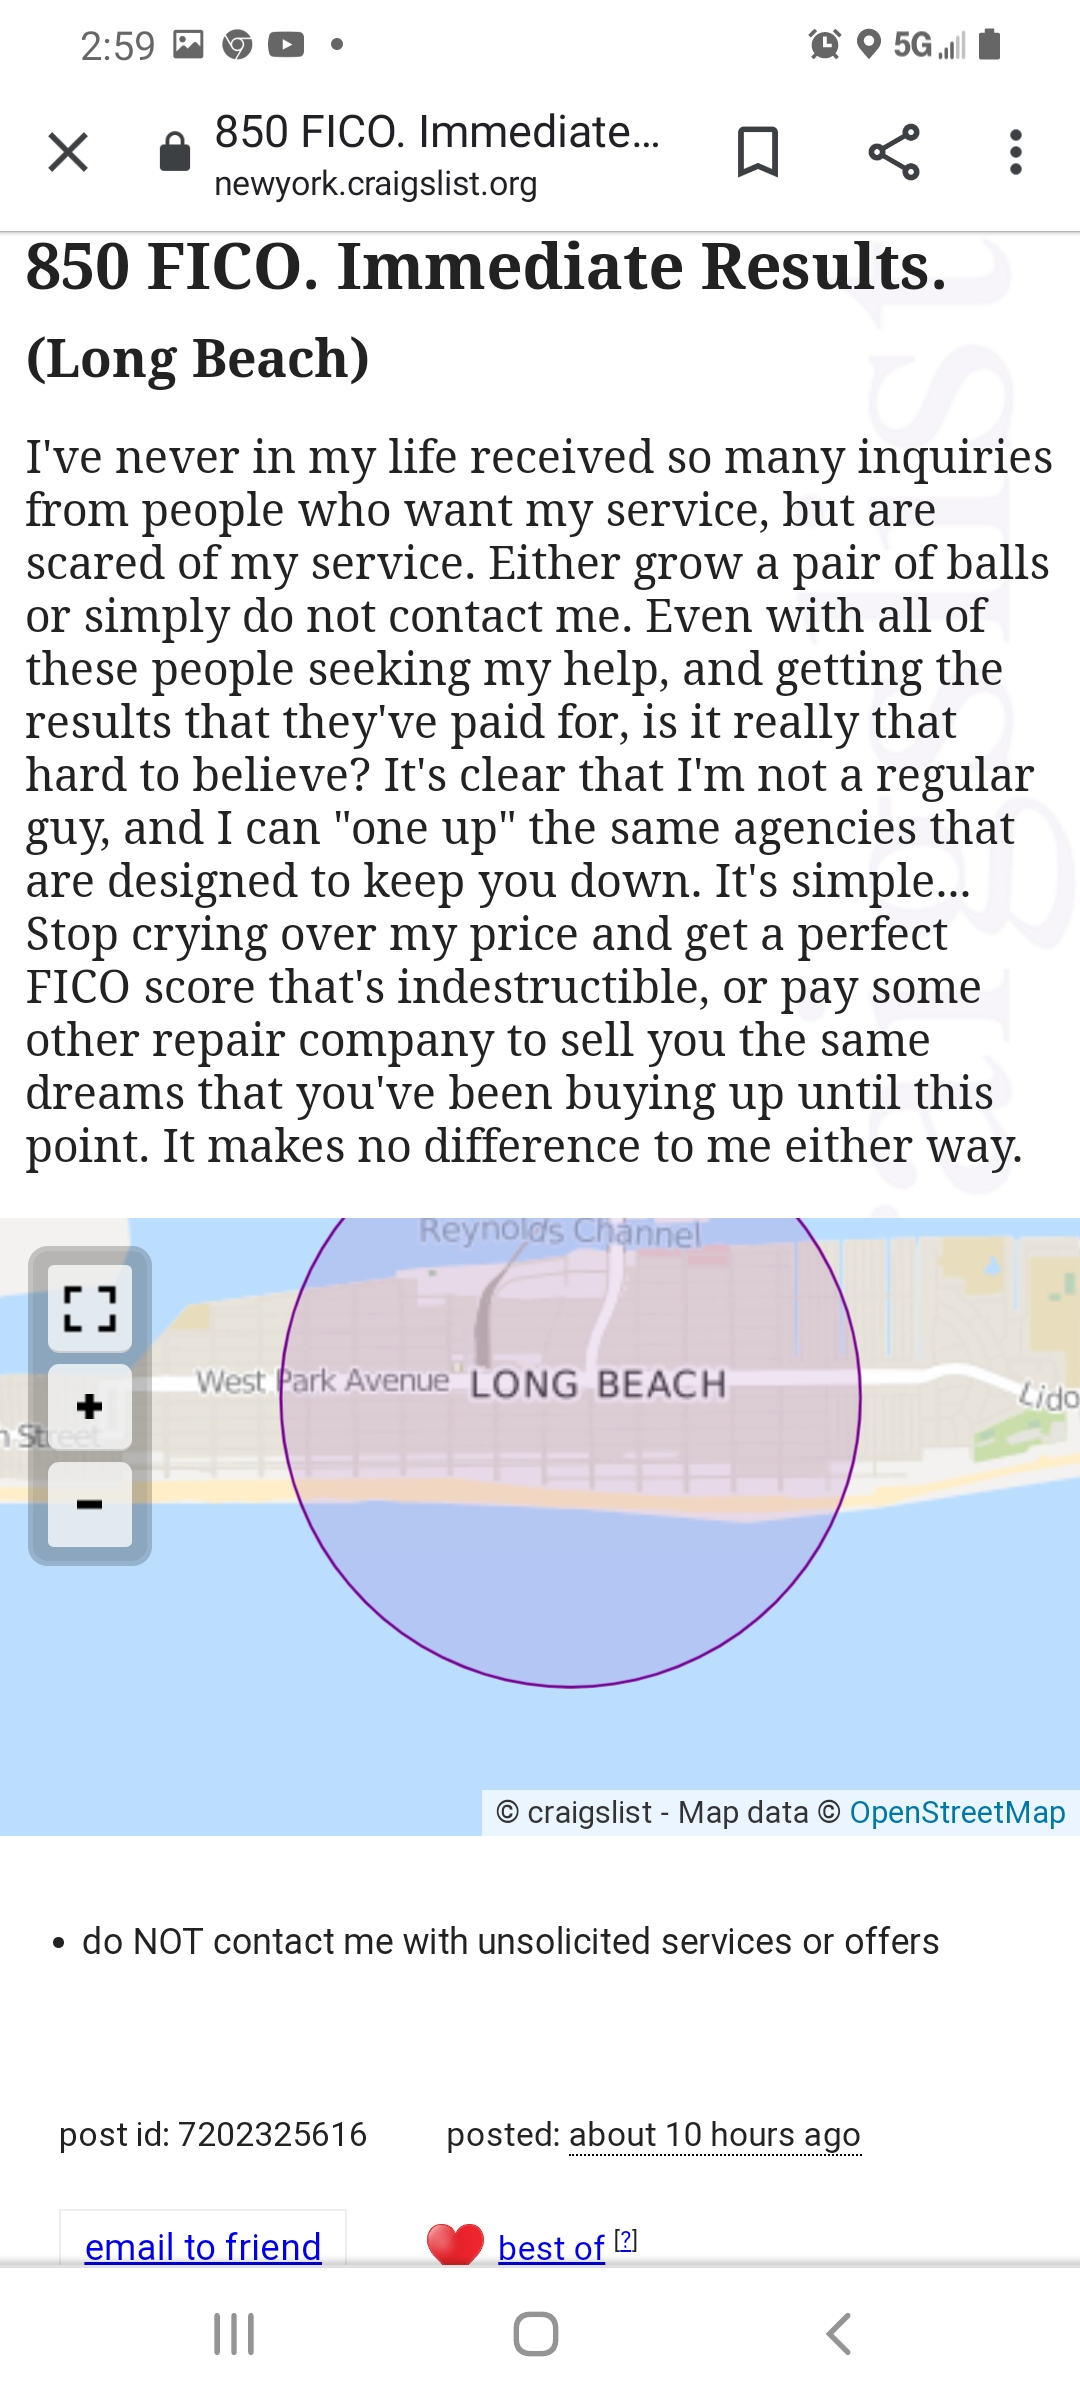 Scammer's ad